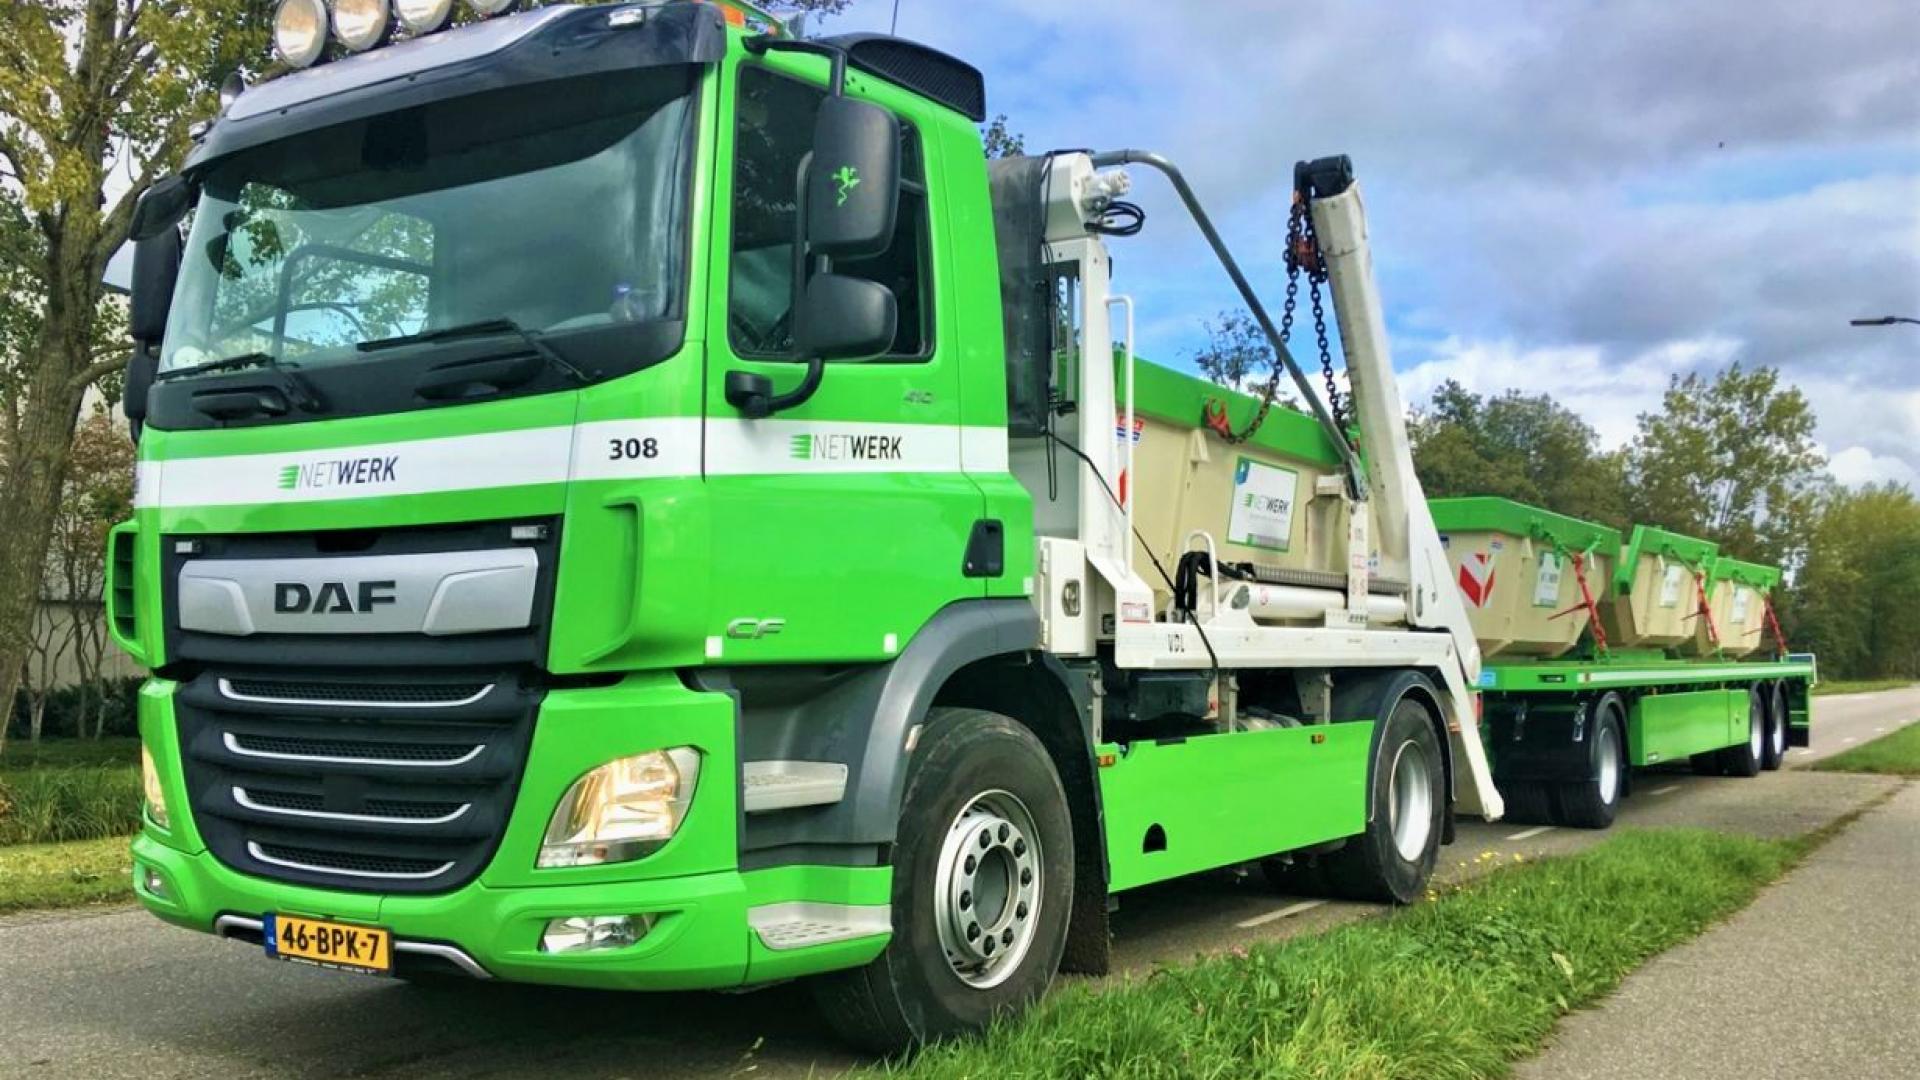 Network now drives a skipload DAF CF truck with trailer